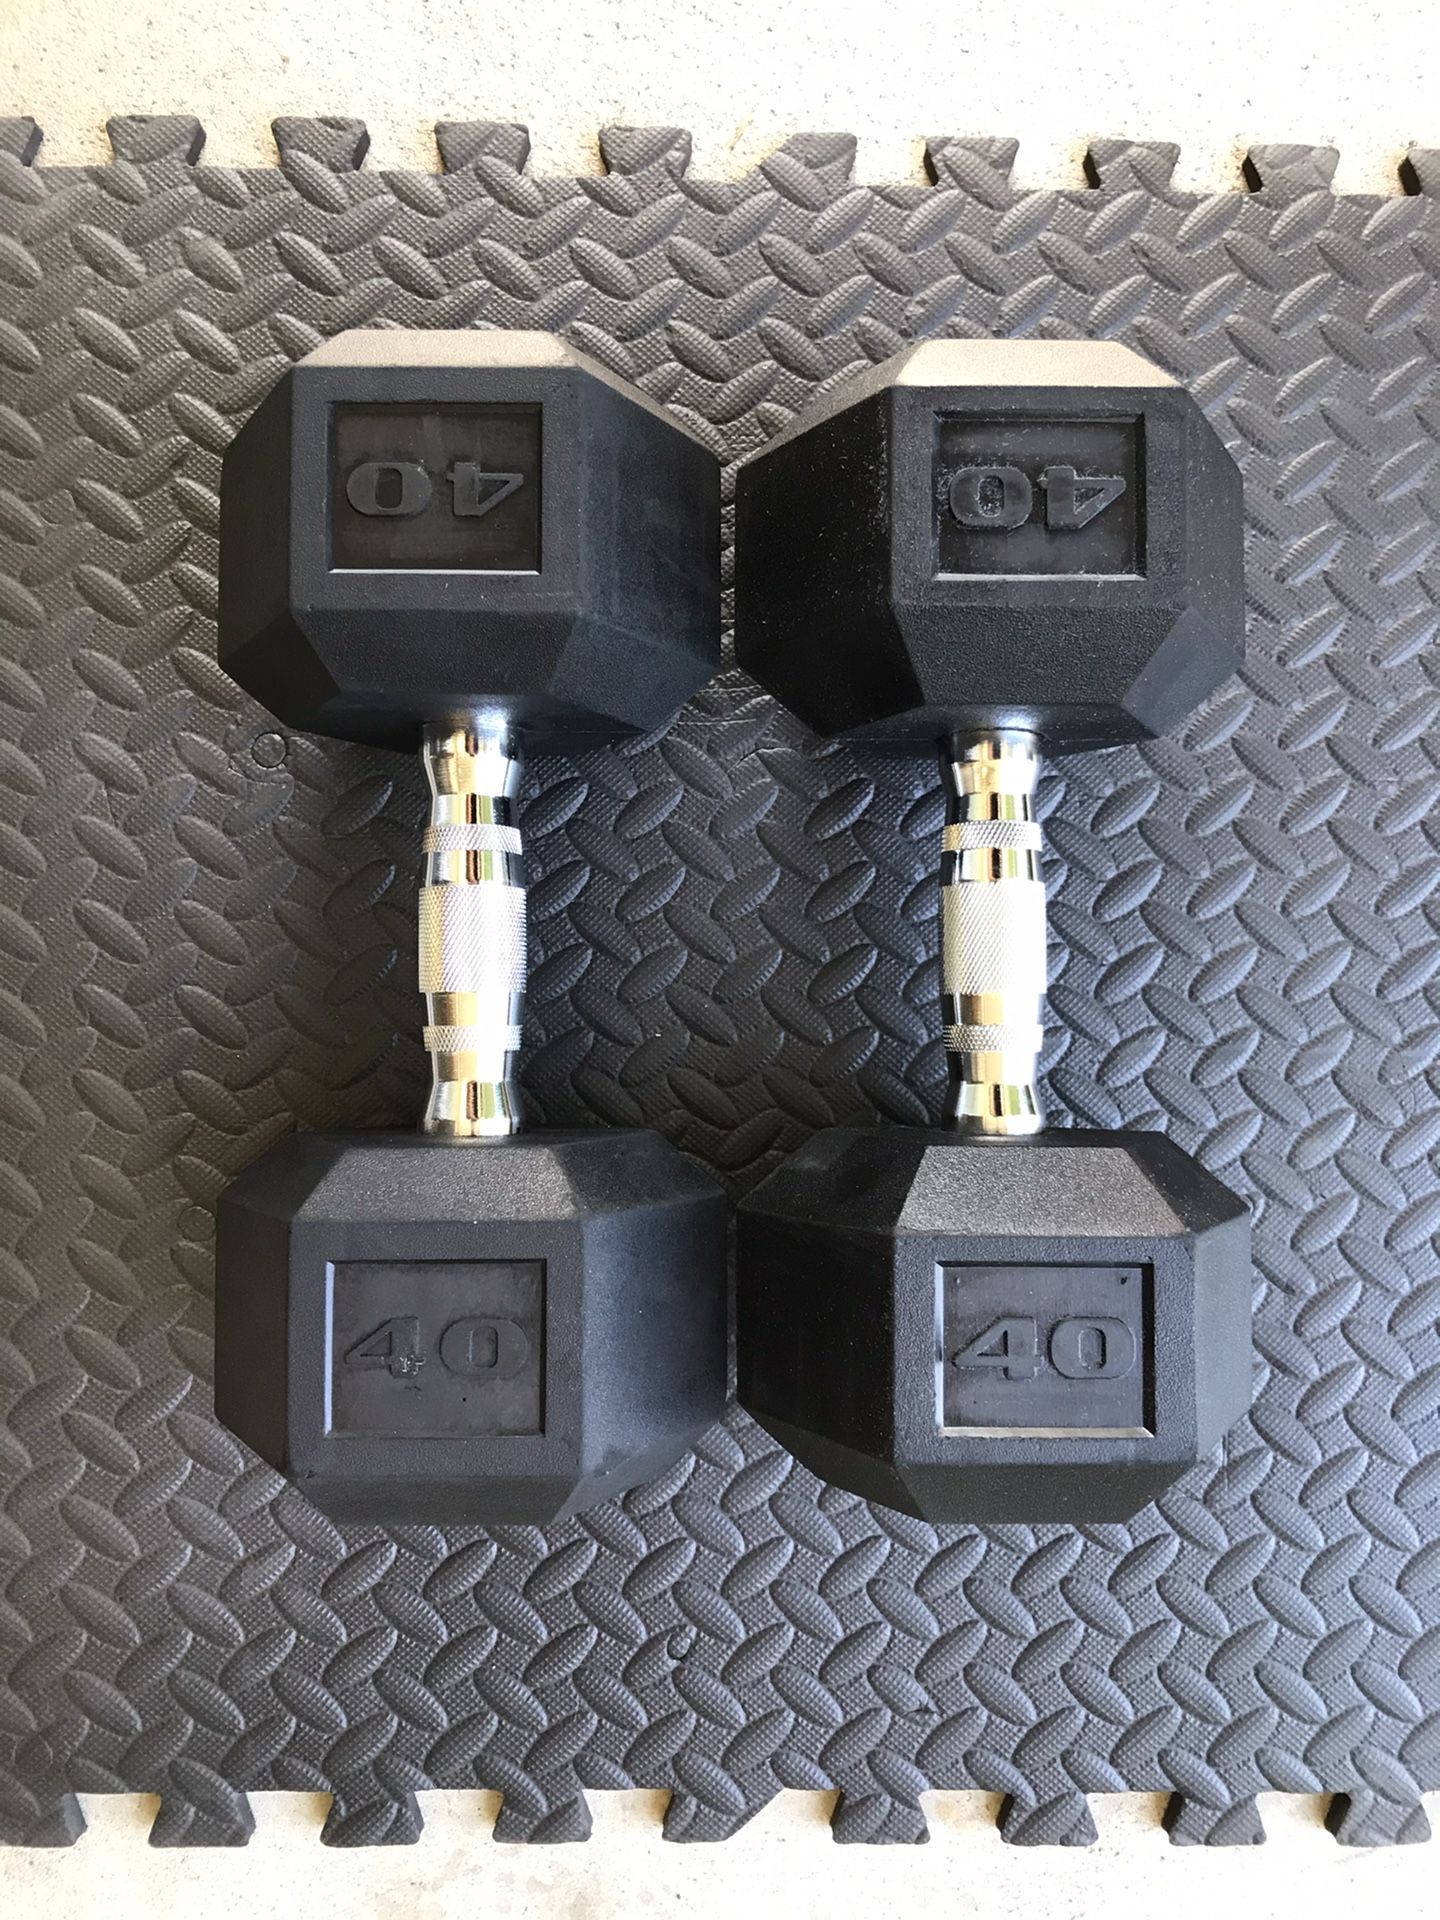 DUMBBELLS WEIGHTS RUBBER GYM CURL 40LBS BENCH DUMBELLS 40 POUNDS NEW!!